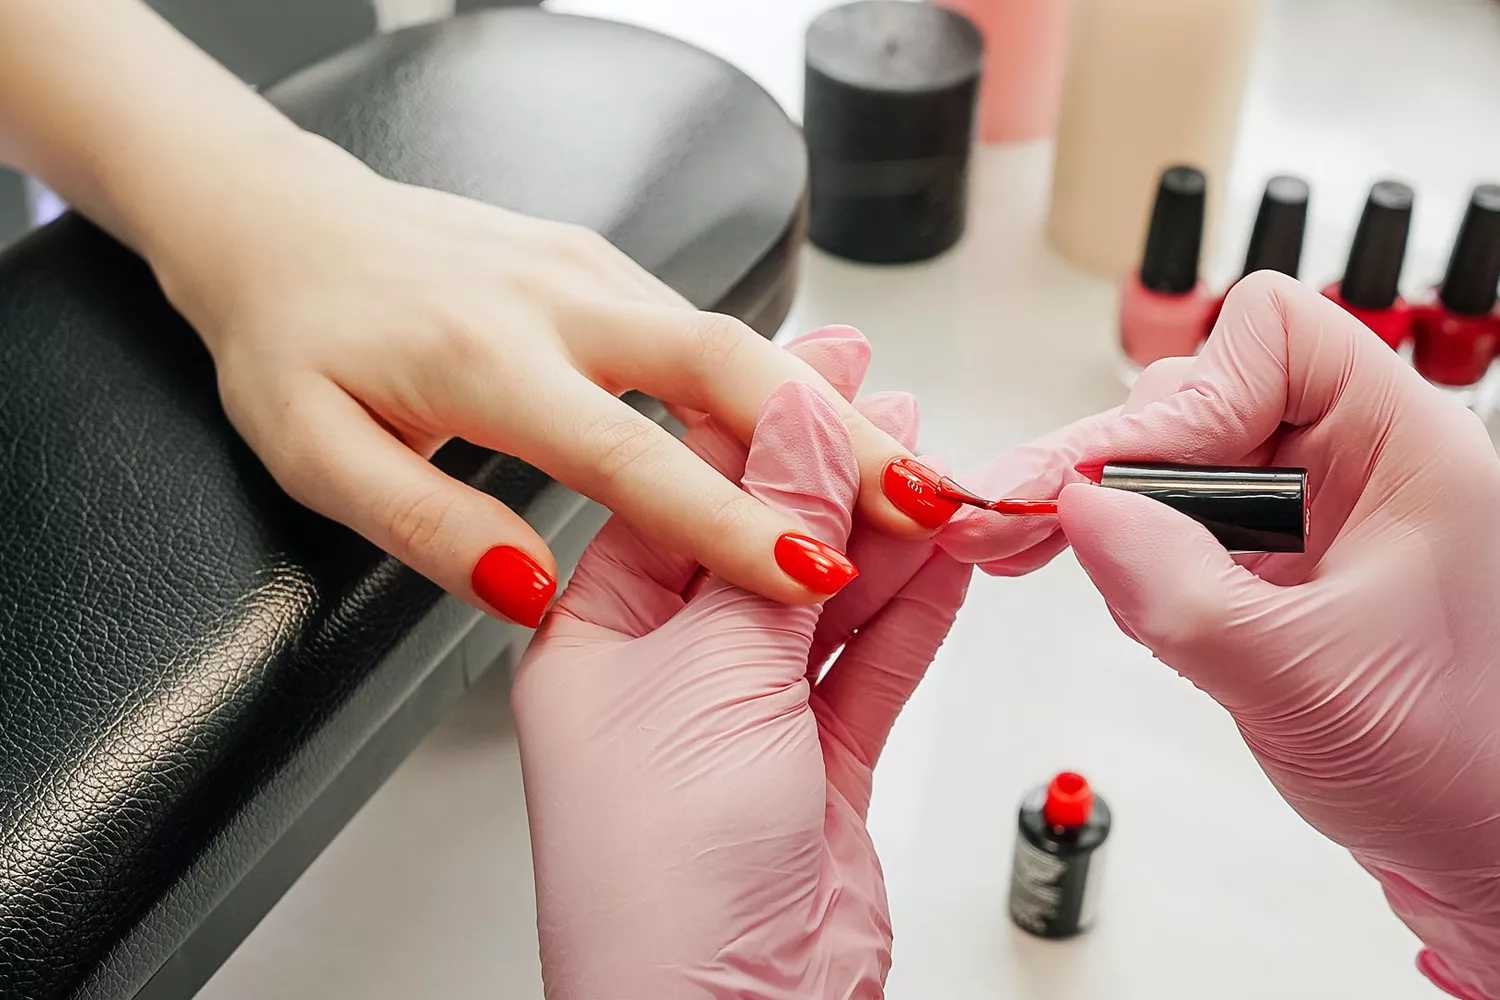 How to use nail polish remover safely?